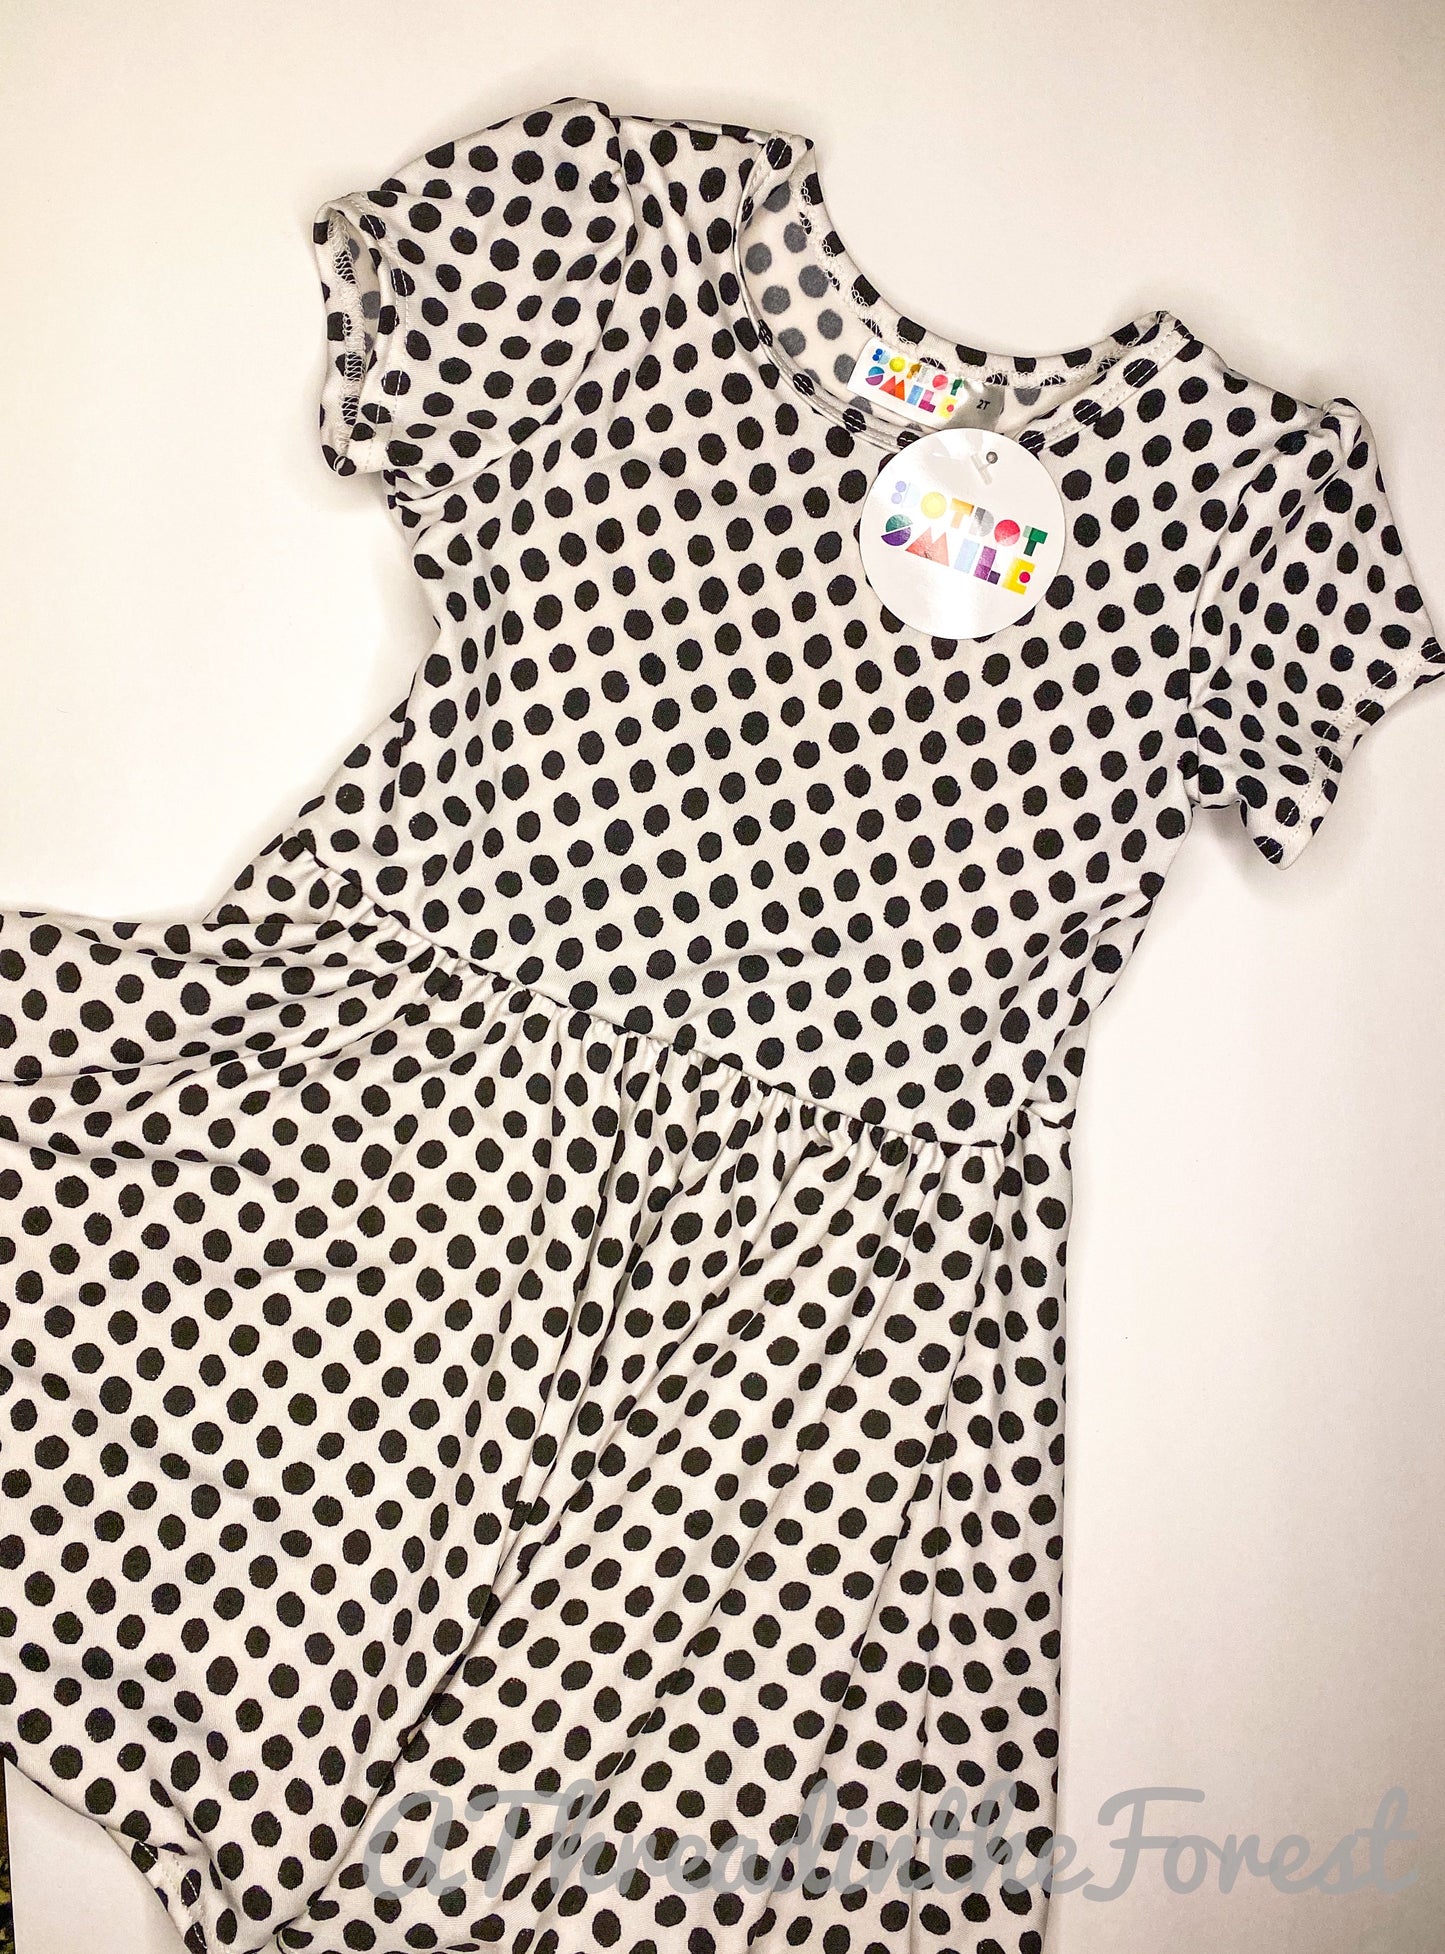 White with Black Polka Dots Dress Size 2T - Classic Cap Style Dress